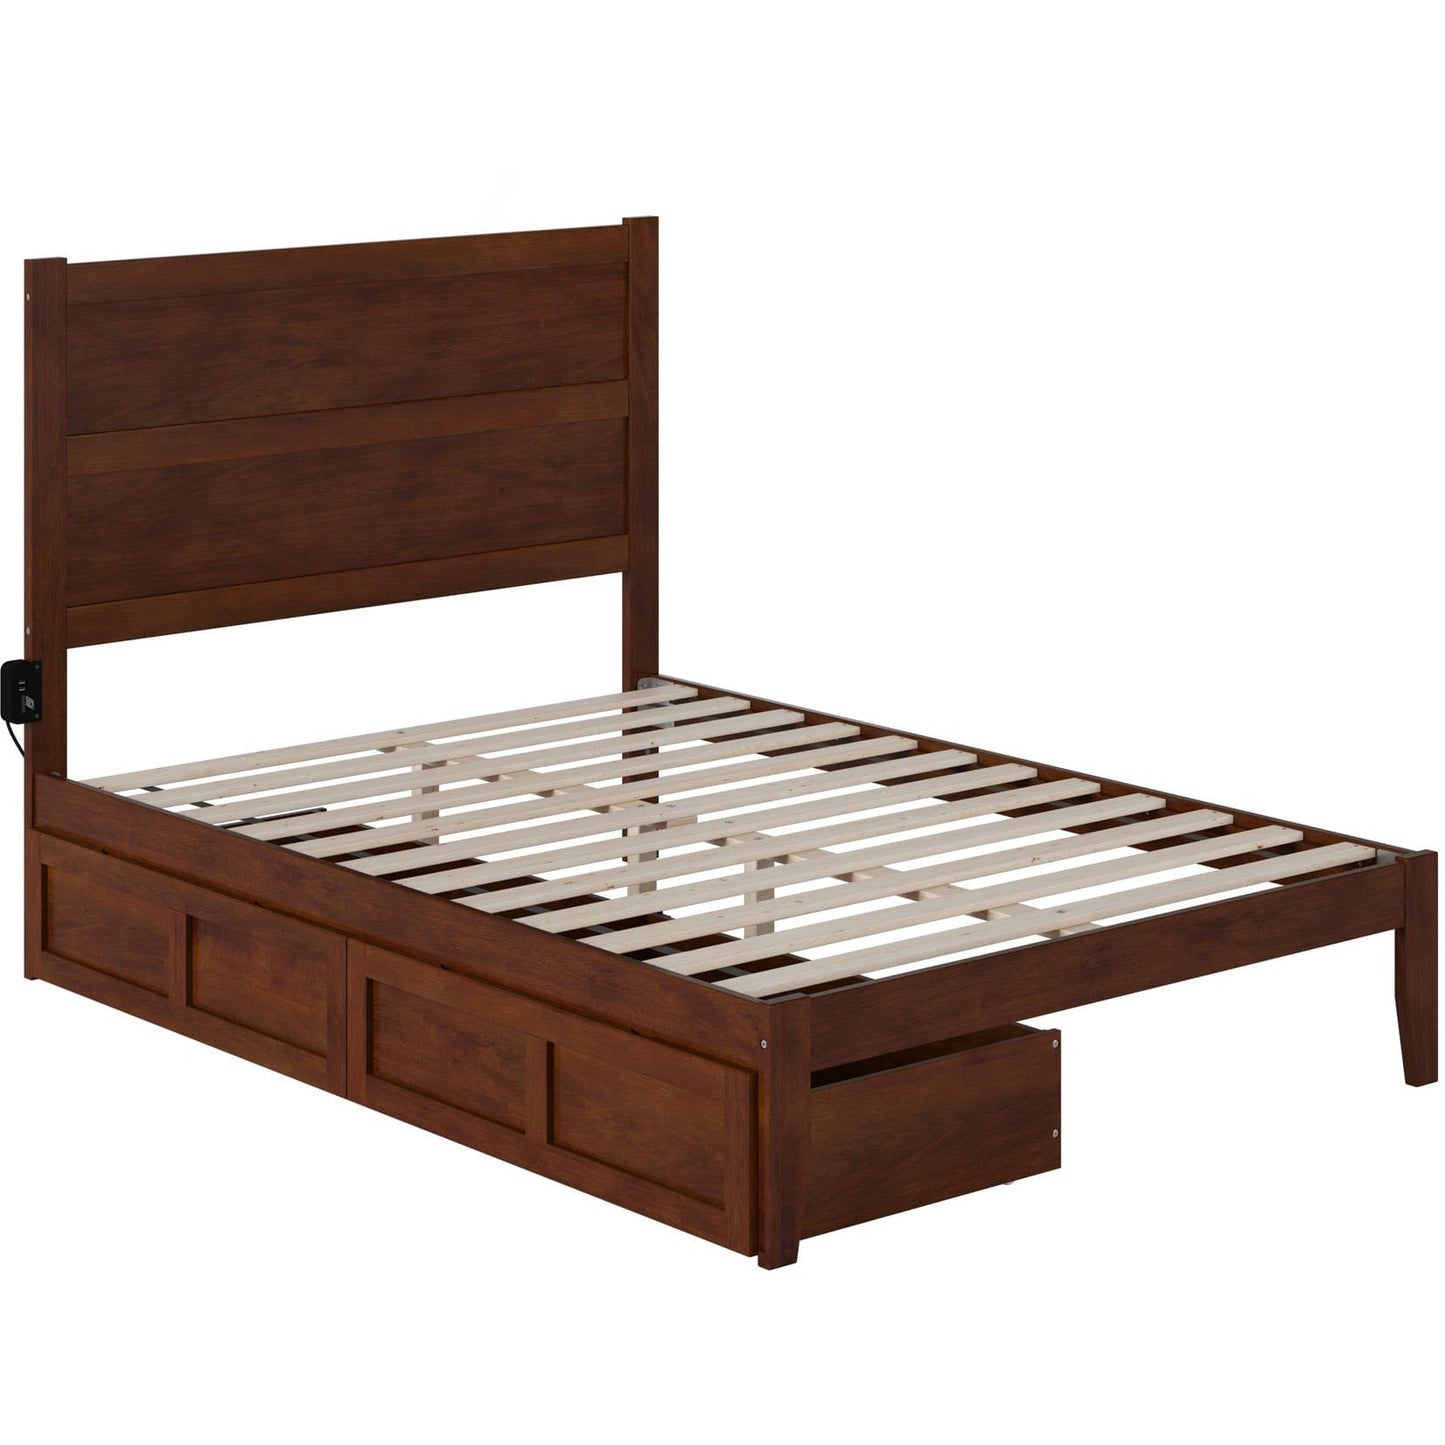 AFI Furnishings NoHo Full Bed with 2 Drawers in Walnut AG9113334